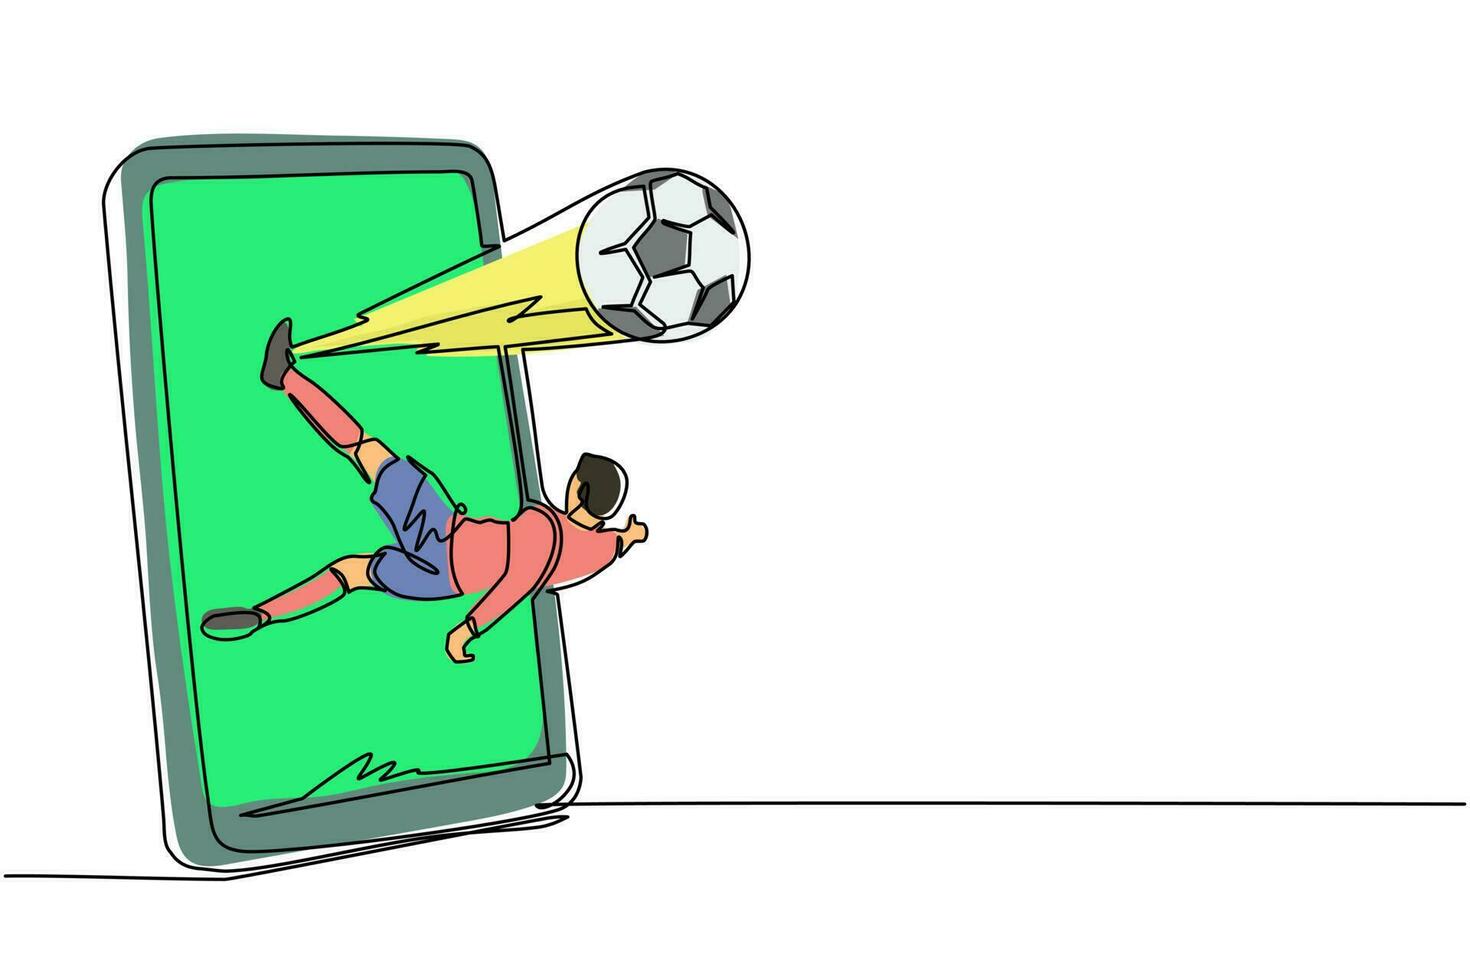 Continuous one line drawing football player kicks some overhead ball out of smartphone screen. Mobile sports play match